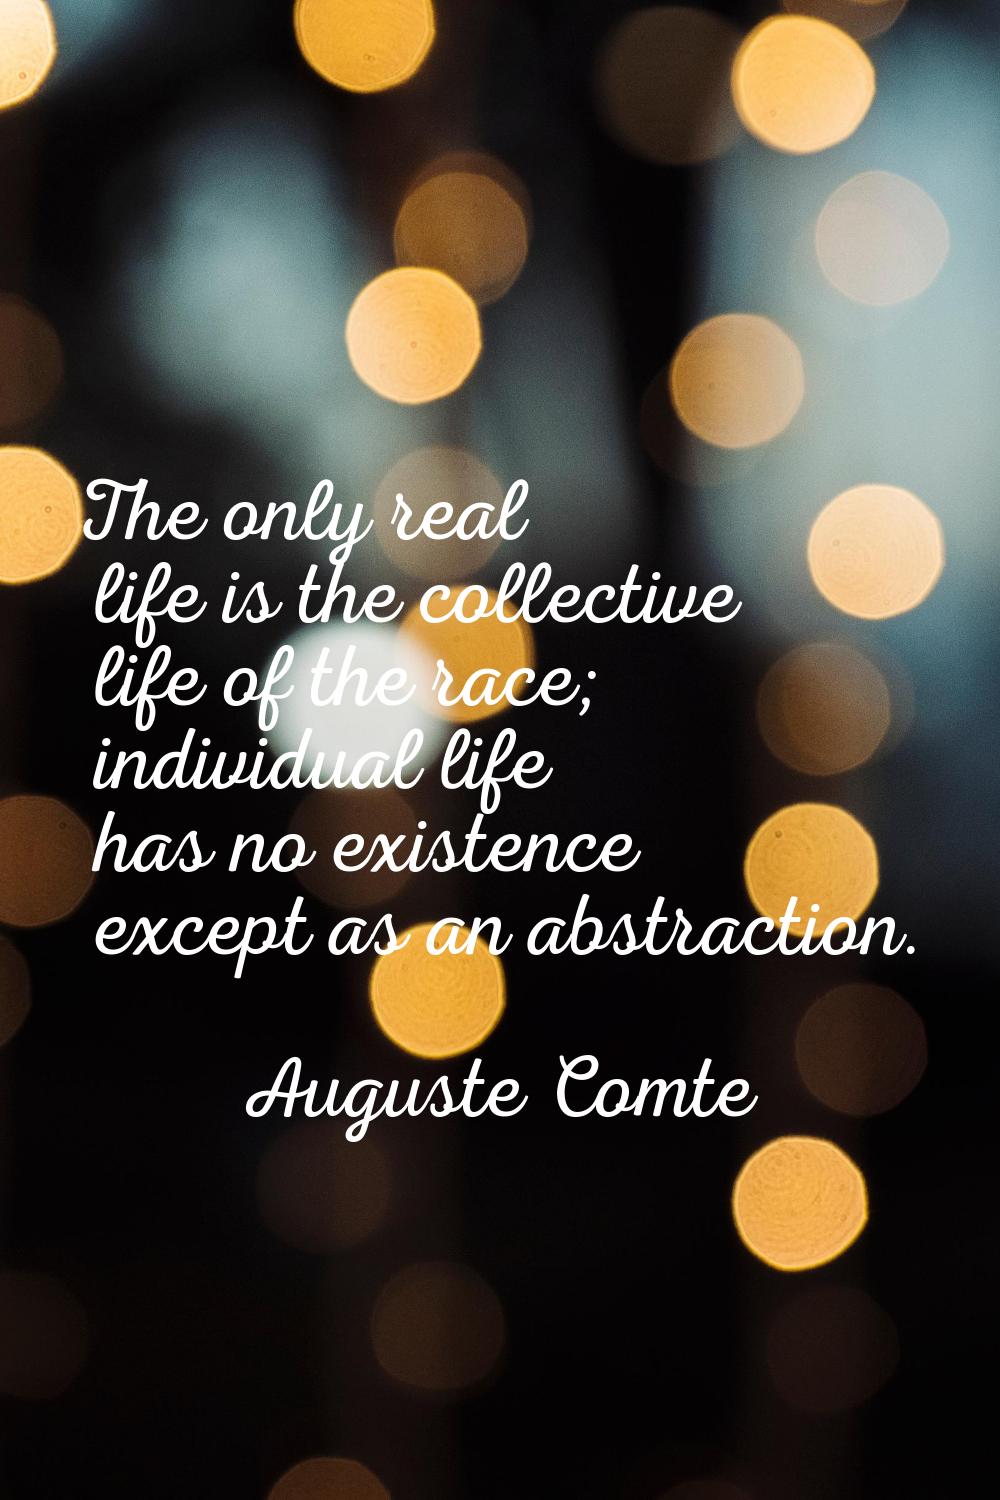 The only real life is the collective life of the race; individual life has no existence except as a